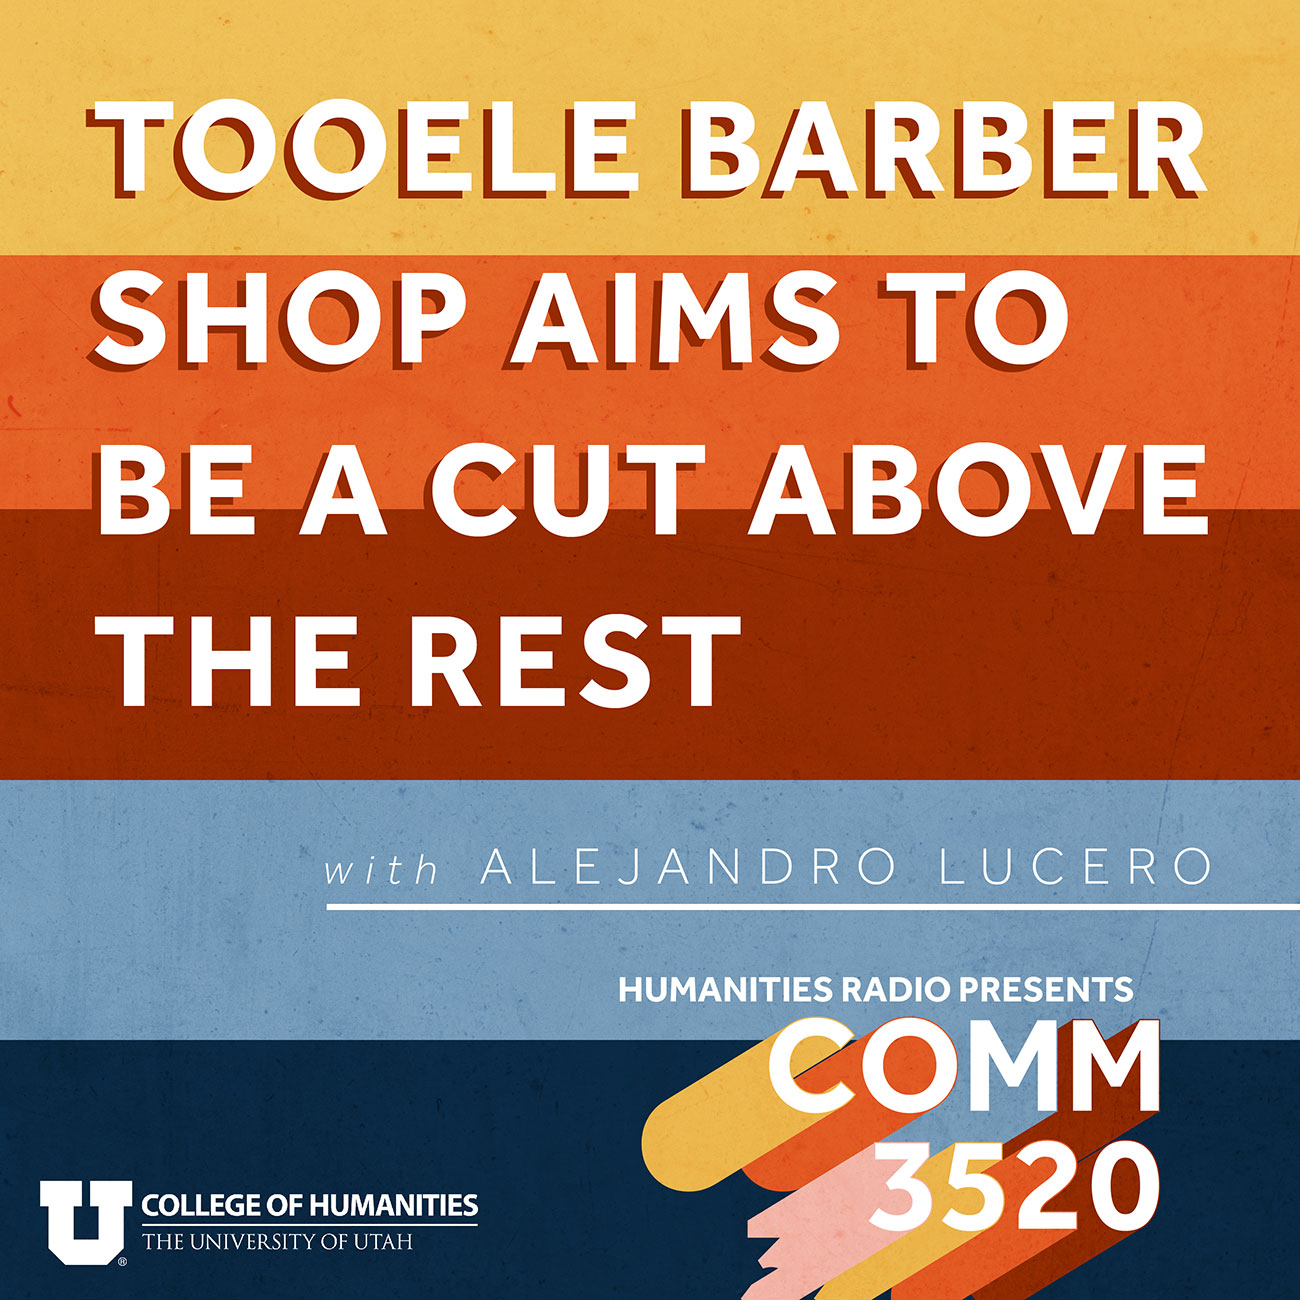 Tooele Barber Shop Aims to be a Cut Above The Rest